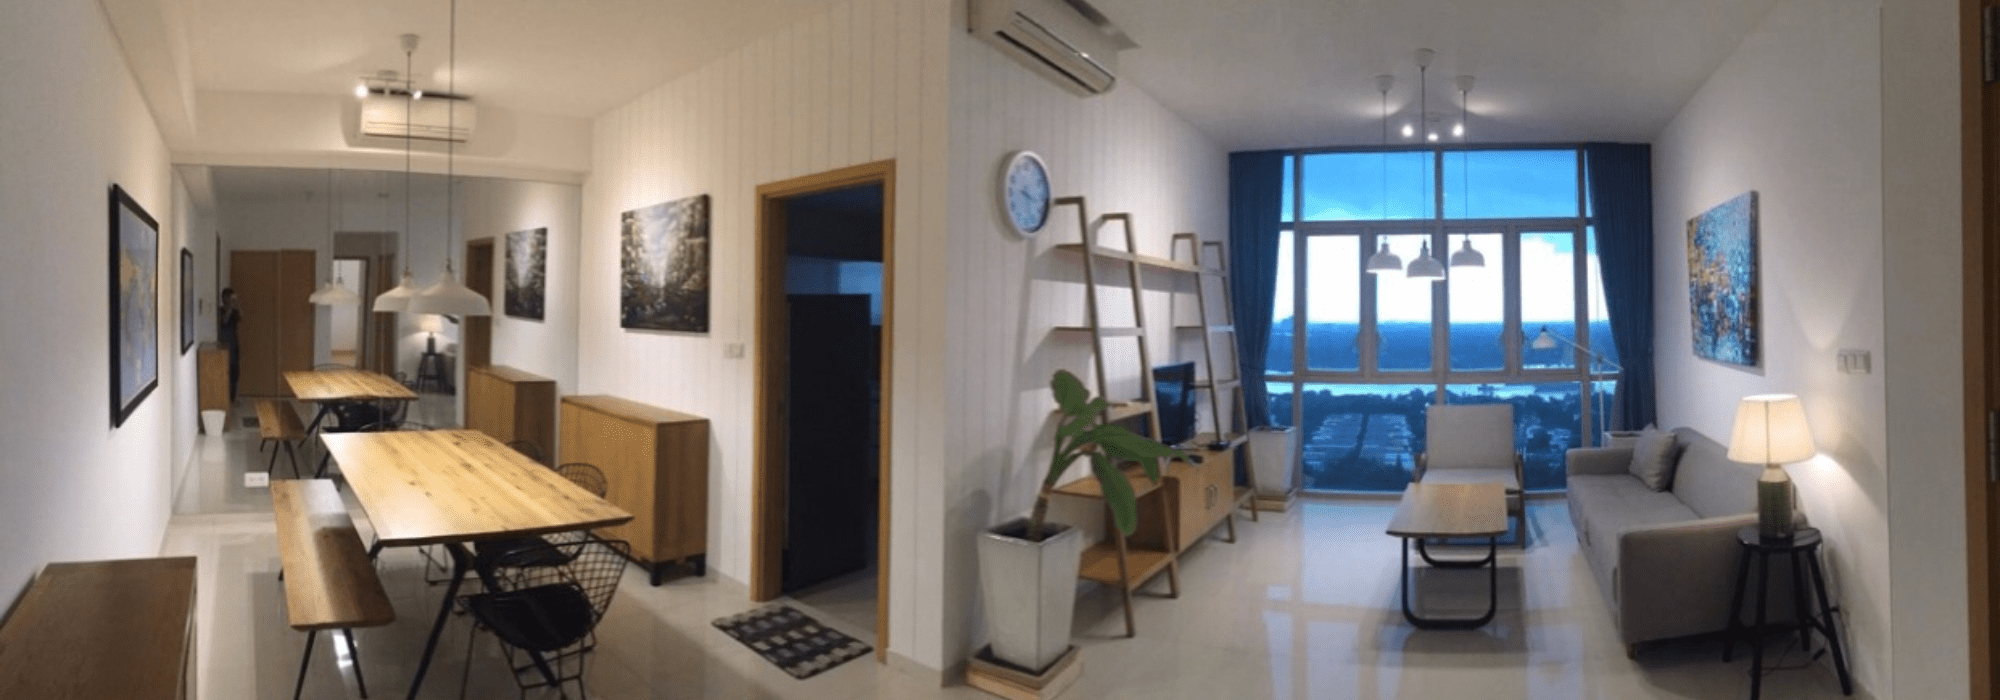 Modern Furnished 2 Bedroom Apartment For Rent With Very Quiet River View In The Vista An Phu